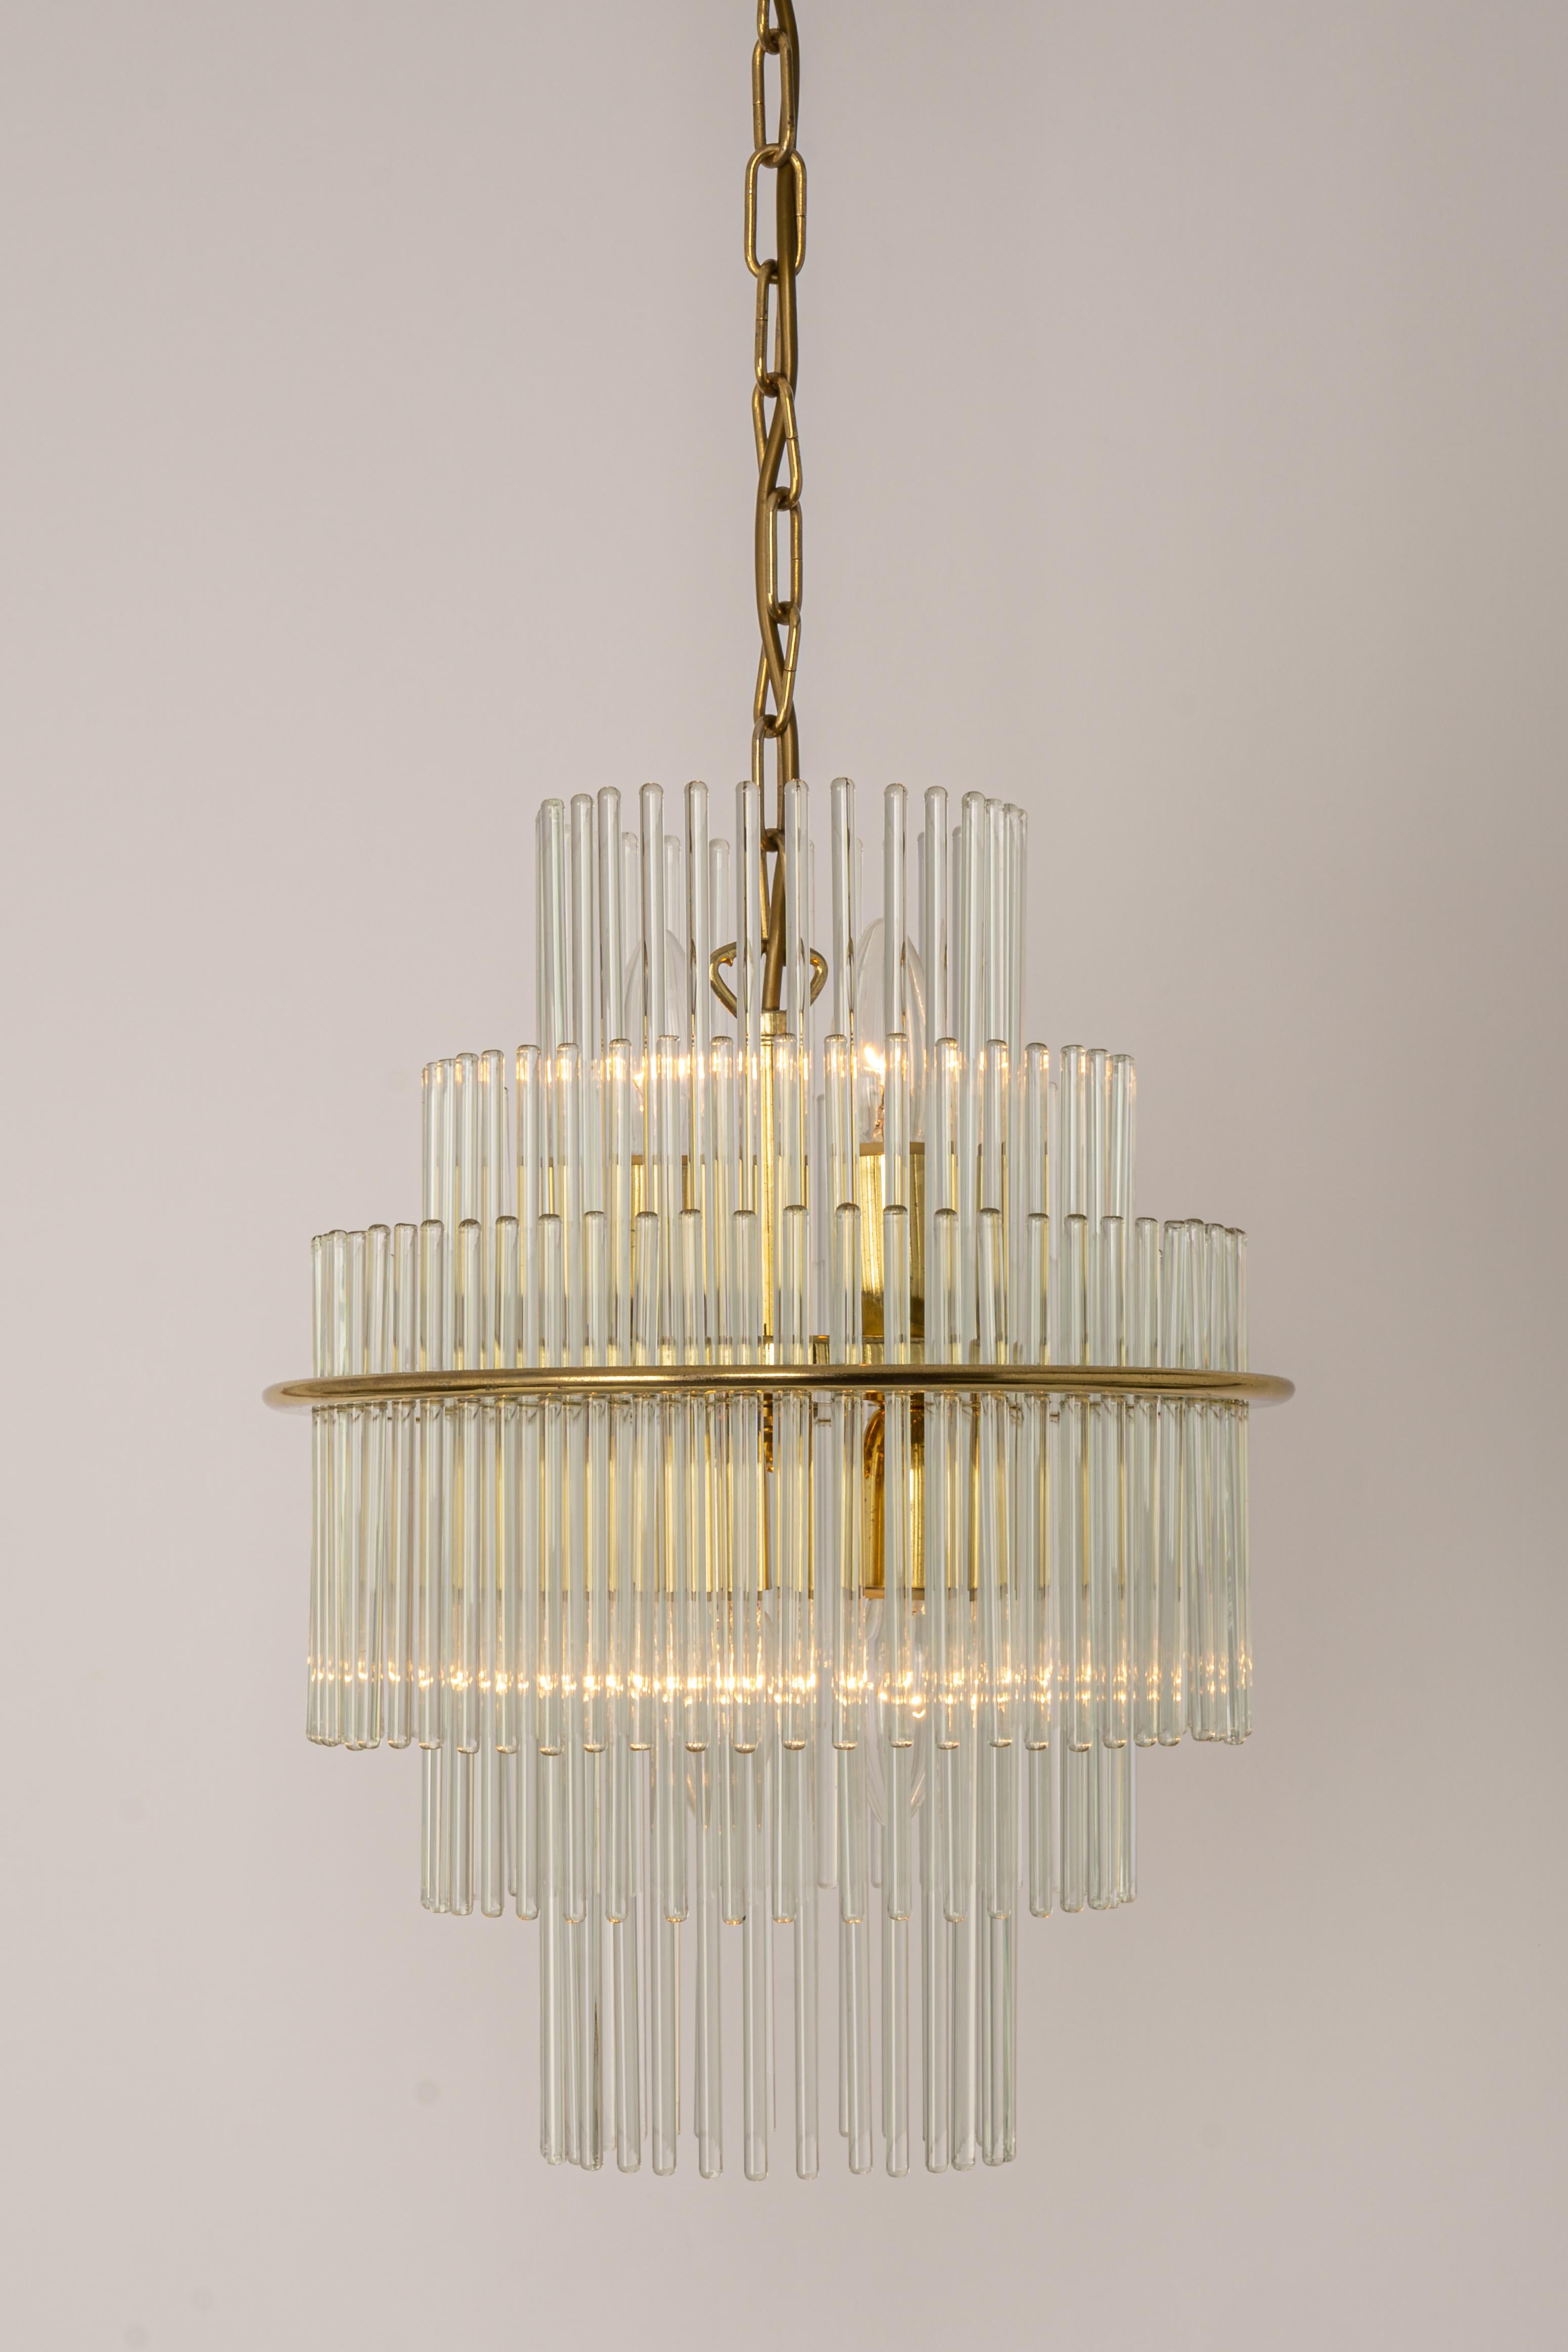 1 of 2 Petite Crystal Glass Rod Pendant Light, Germany, 1970s For Sale 2